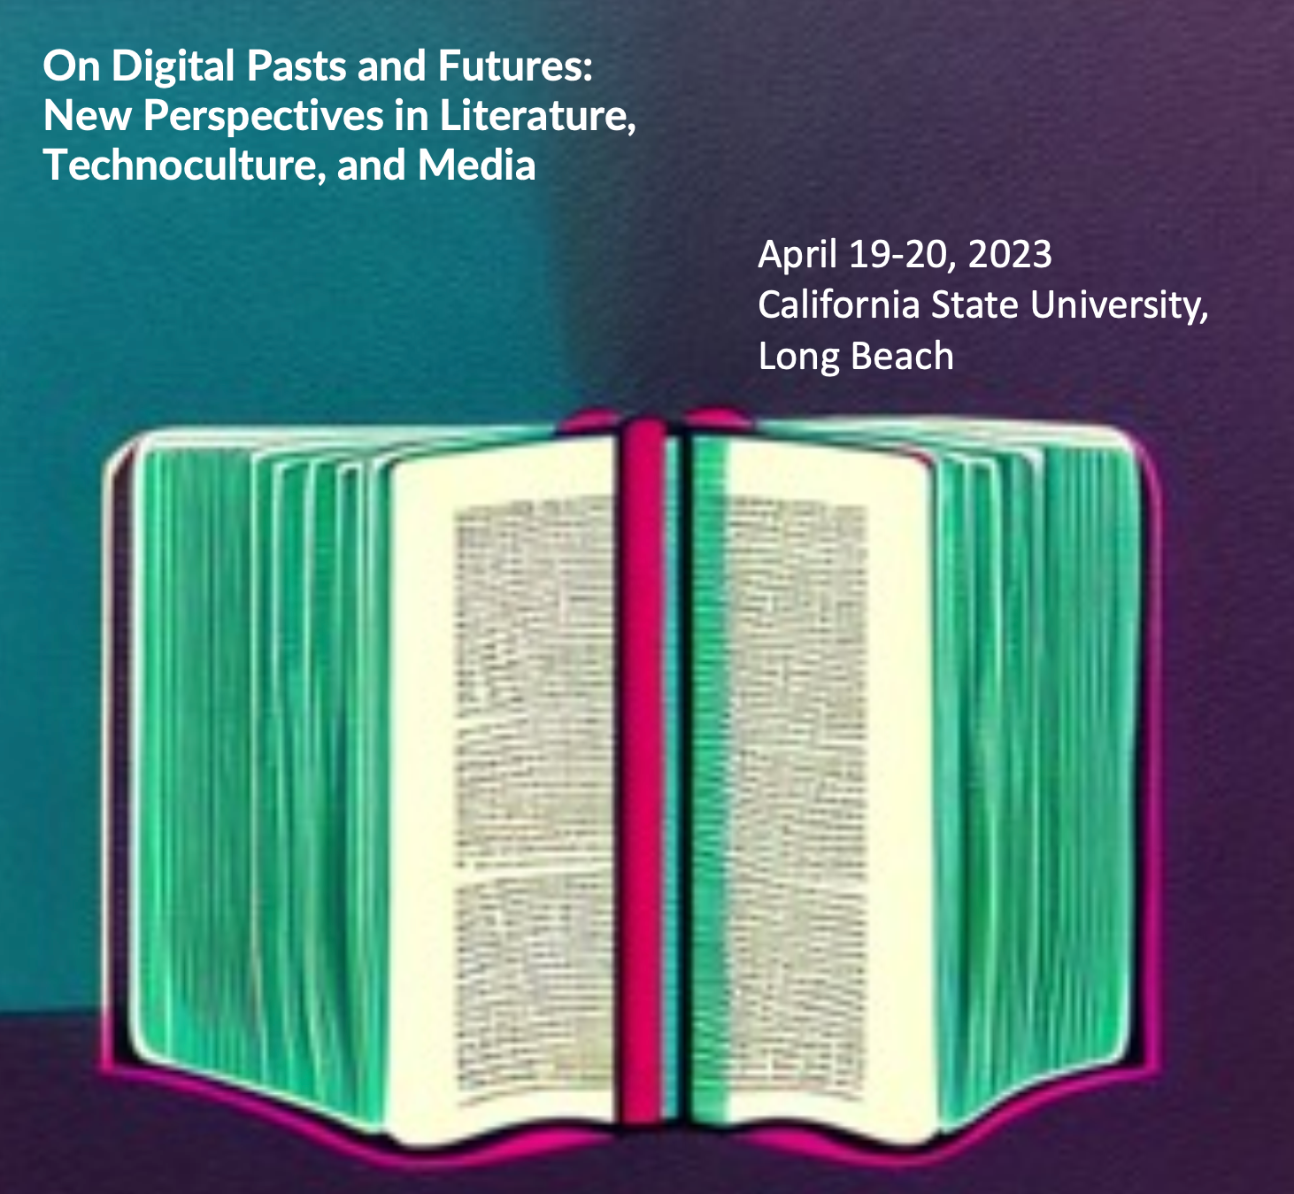 On Digital Pasts and Futures: New Perspectives in Literature, Technoculture, and Media (Long Beach, CA, USA)